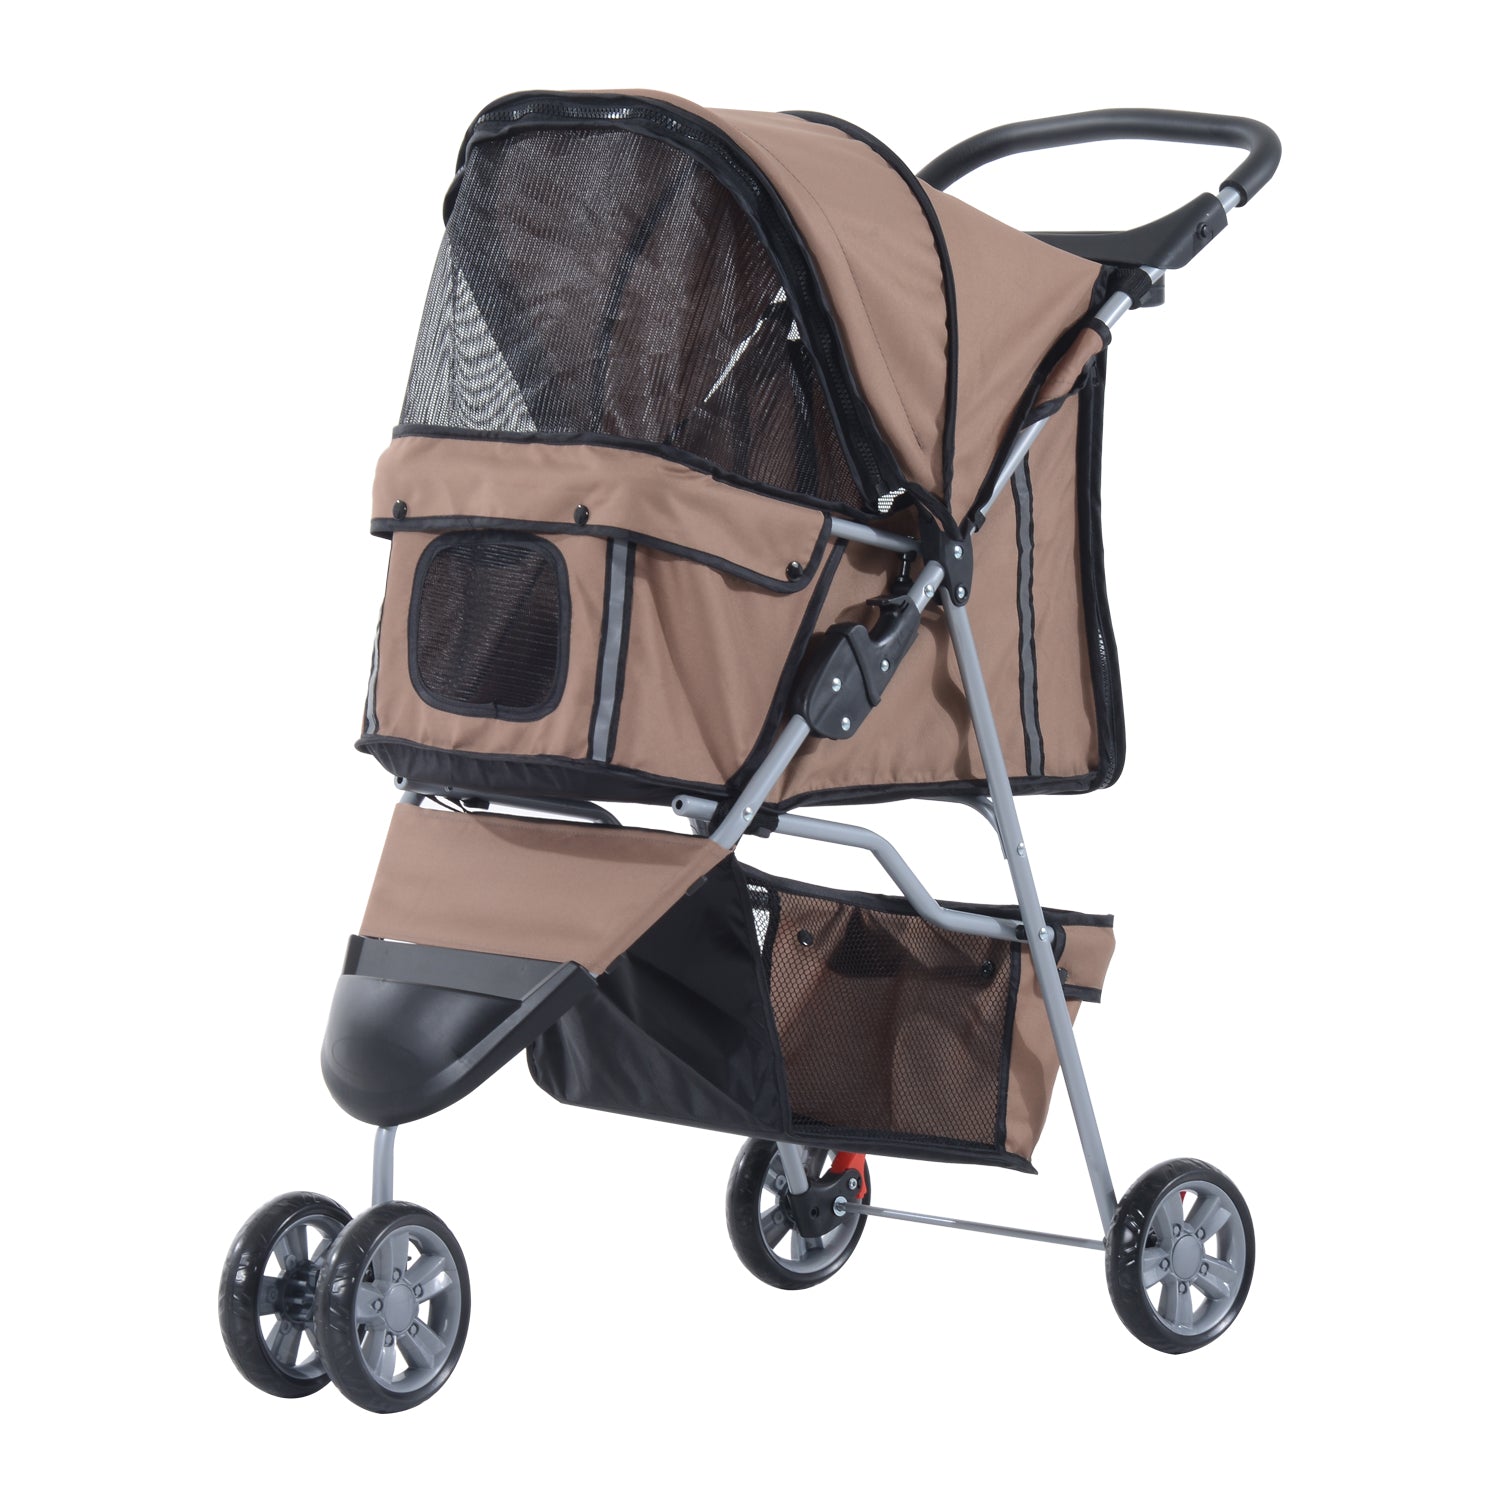 Dogs Oxford Cloth Three Wheel Pram Coffee - Suitable for Small Pets